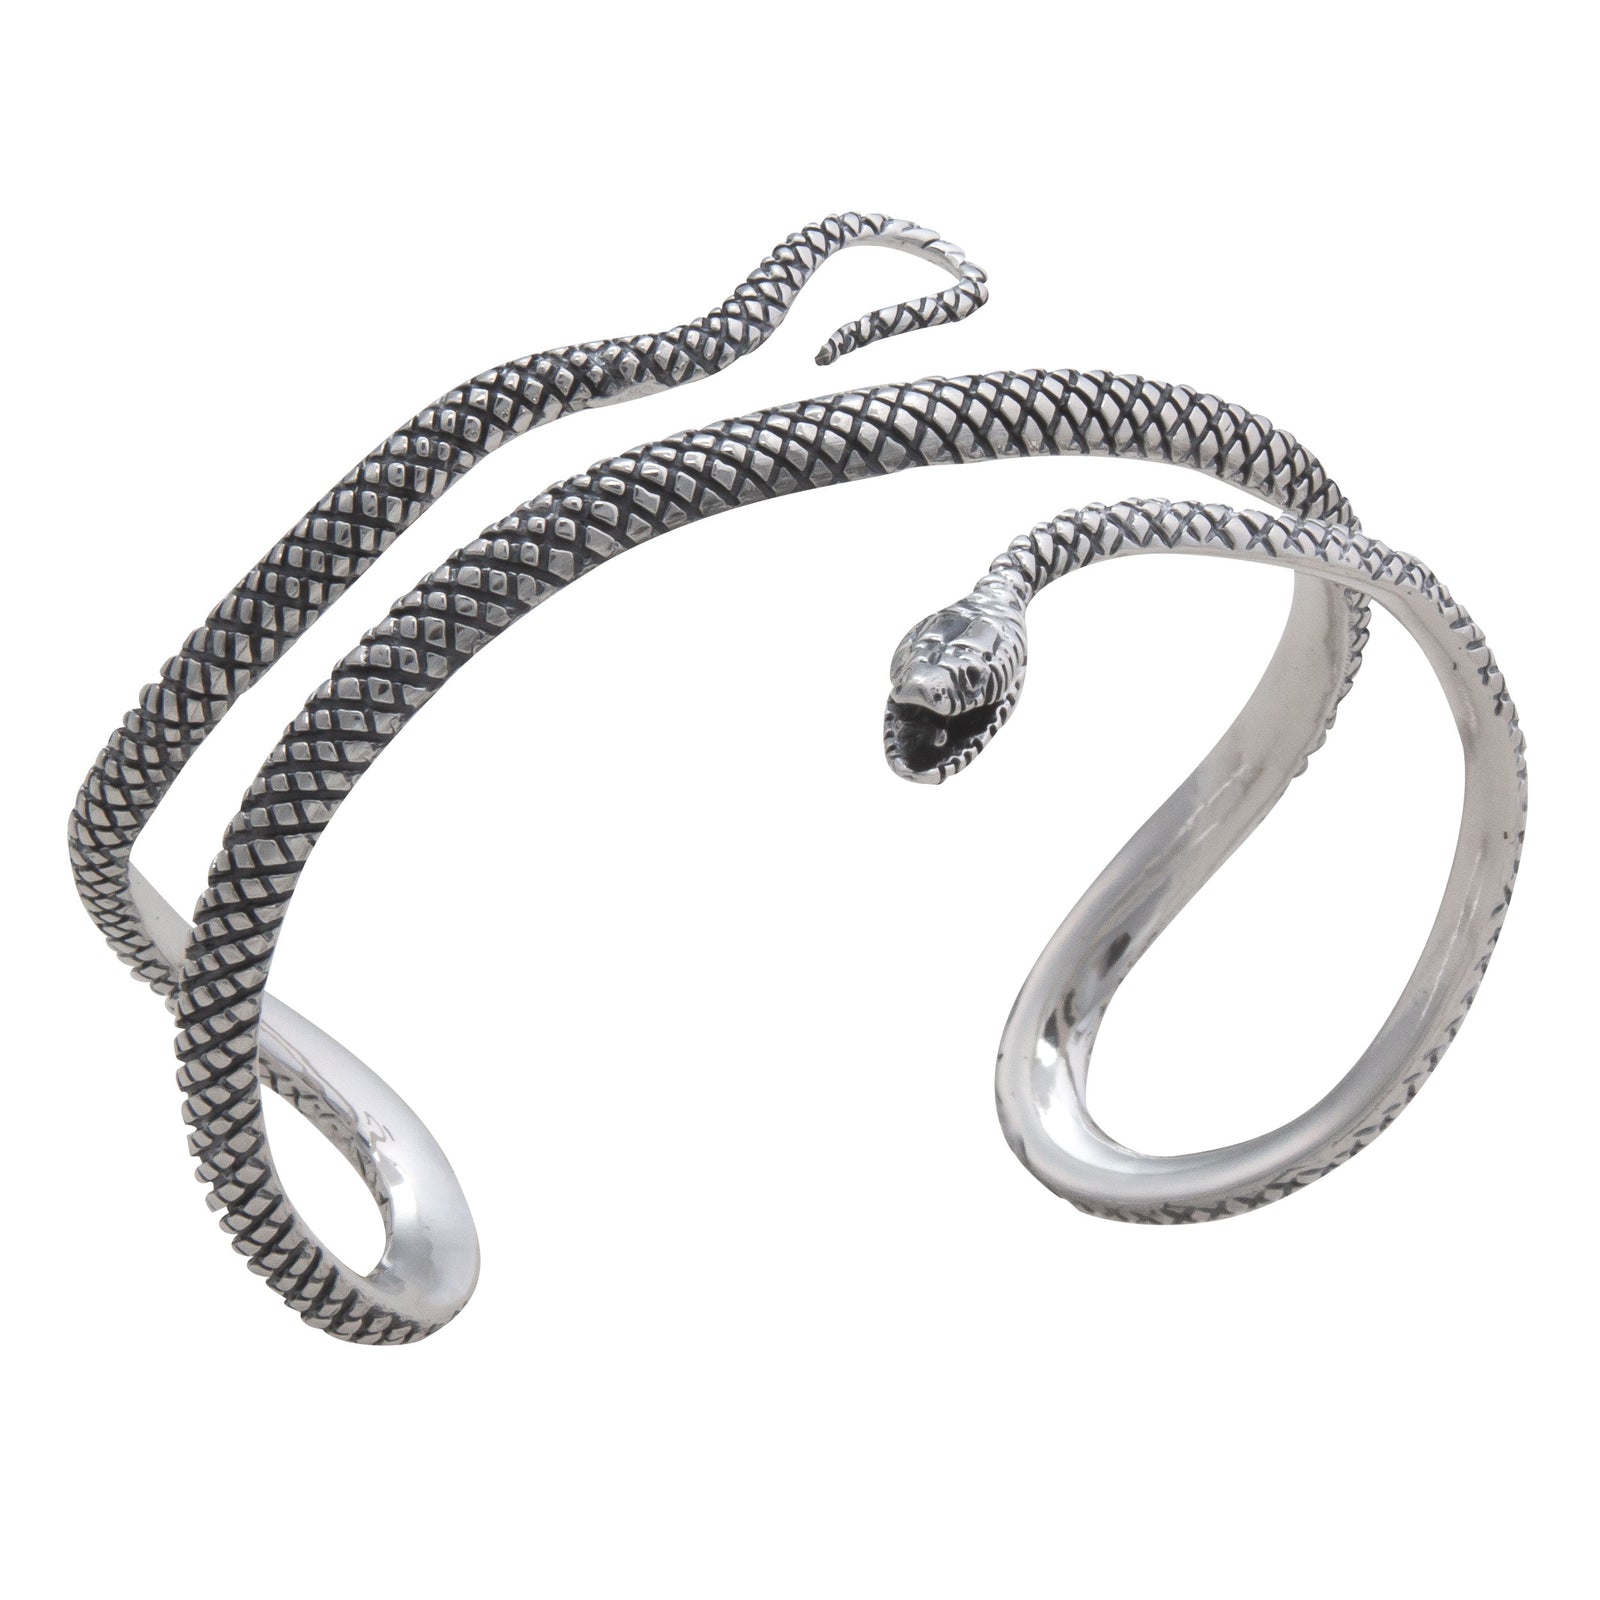 Sterling Silver Oxidized Snake Cuffs | Charles Albert Jewelry